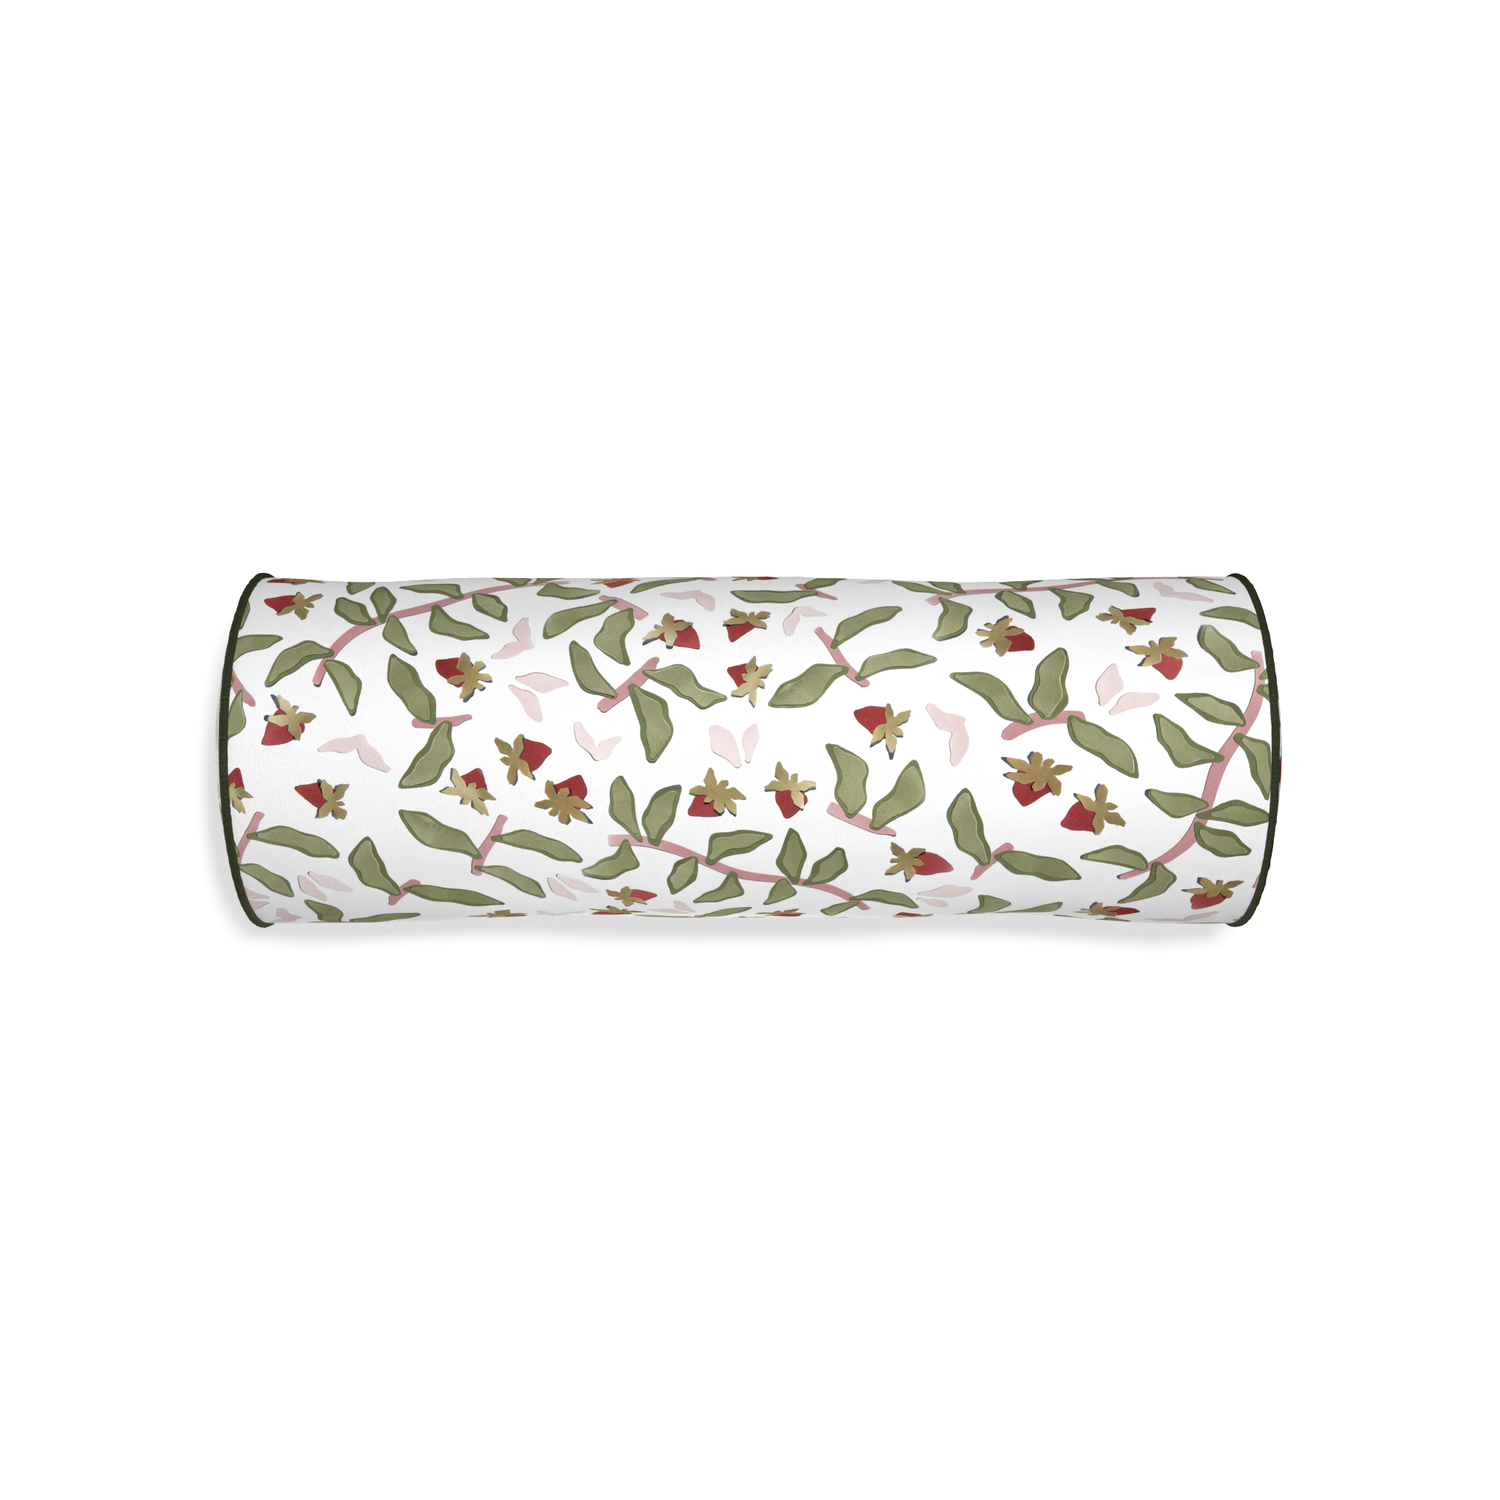 Bolster nellie custom strawberry & botanicalpillow with f piping on white background